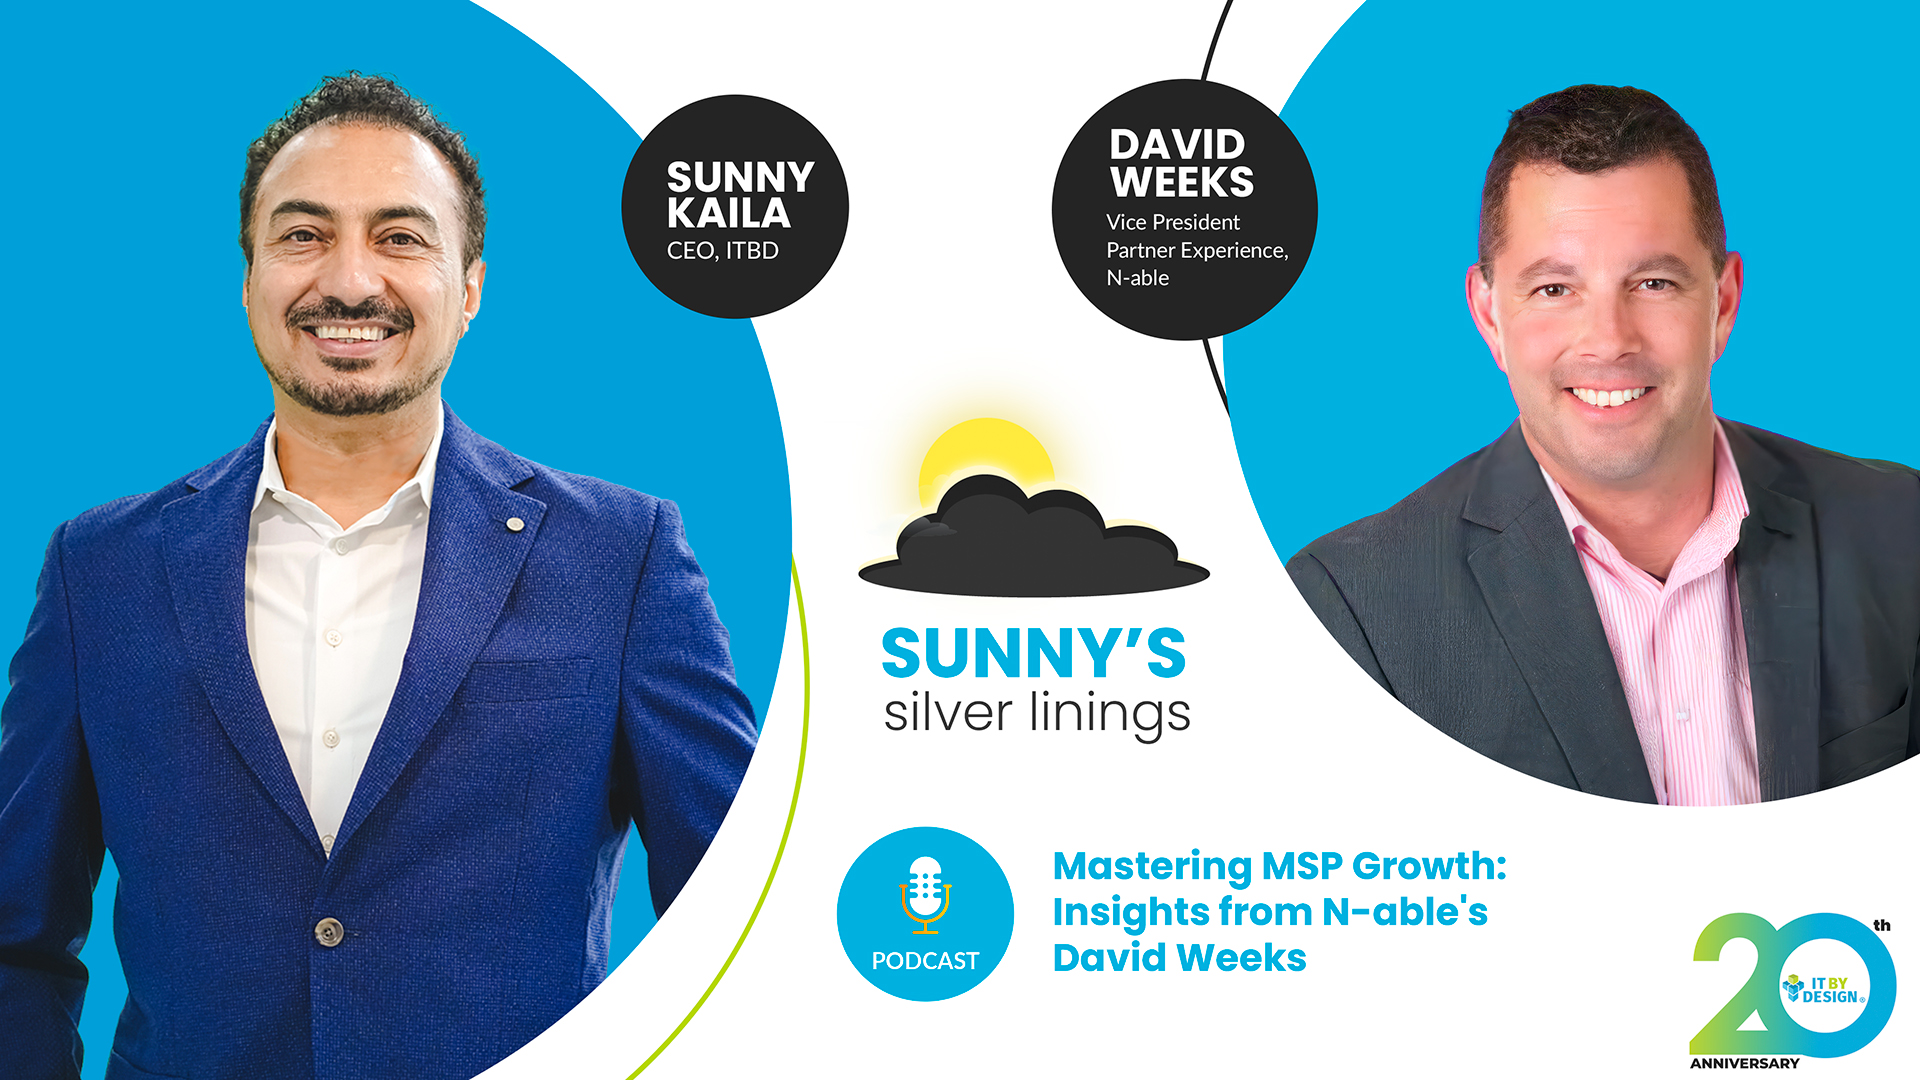 Mastering MSP Growth: Insights from N-able's David Weeks